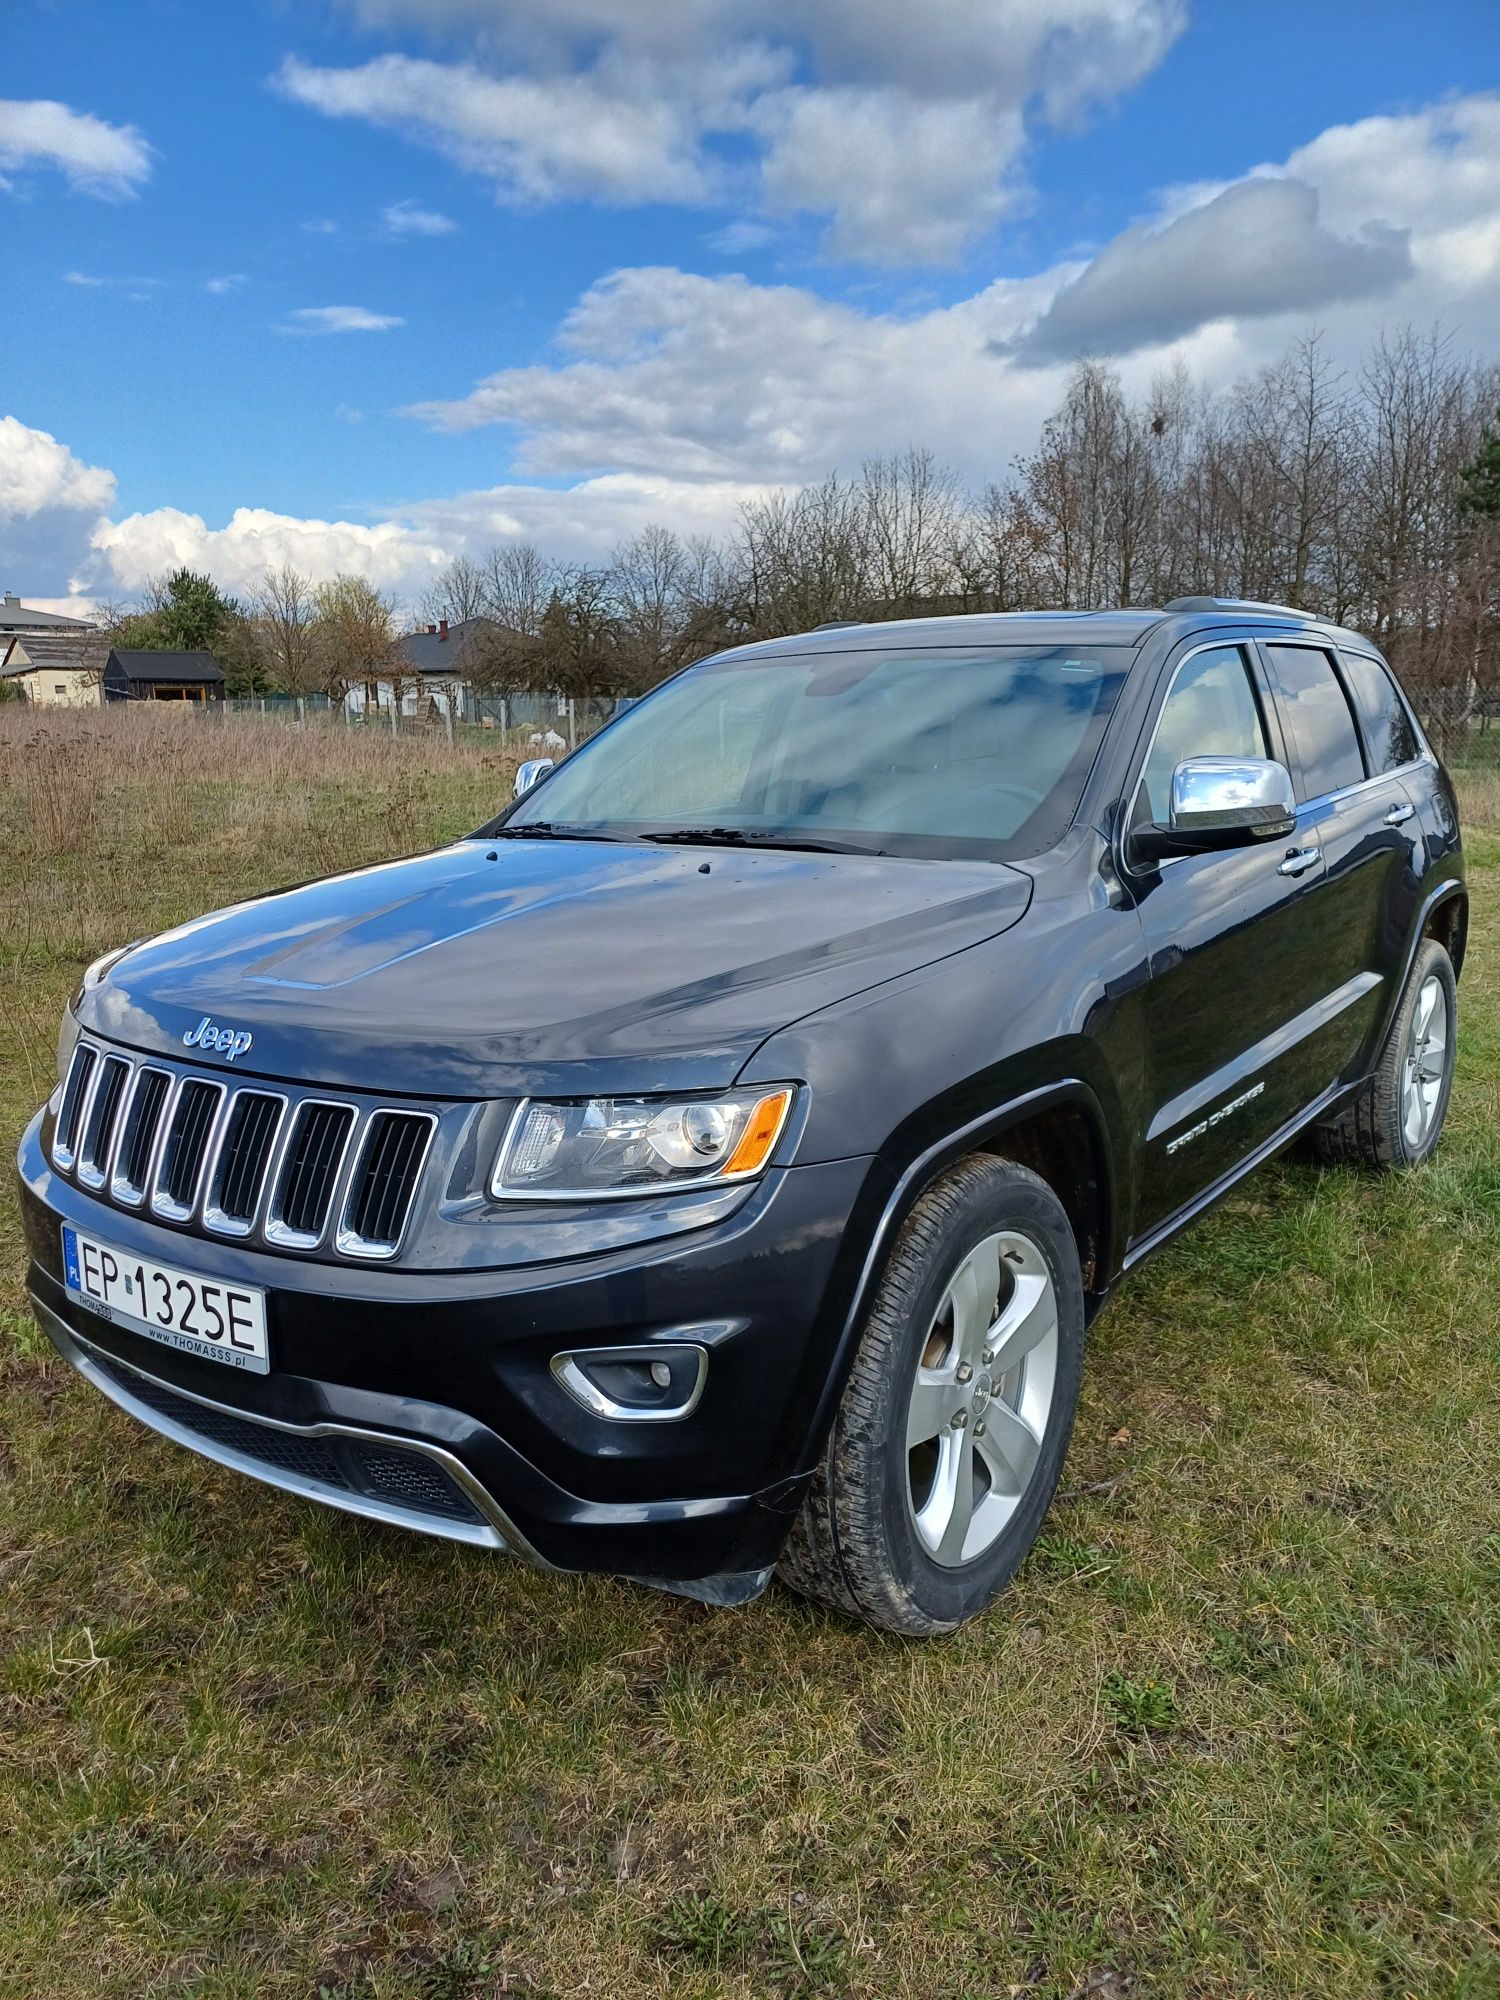 Jeep grand cherokee 3.7 wk2 limited